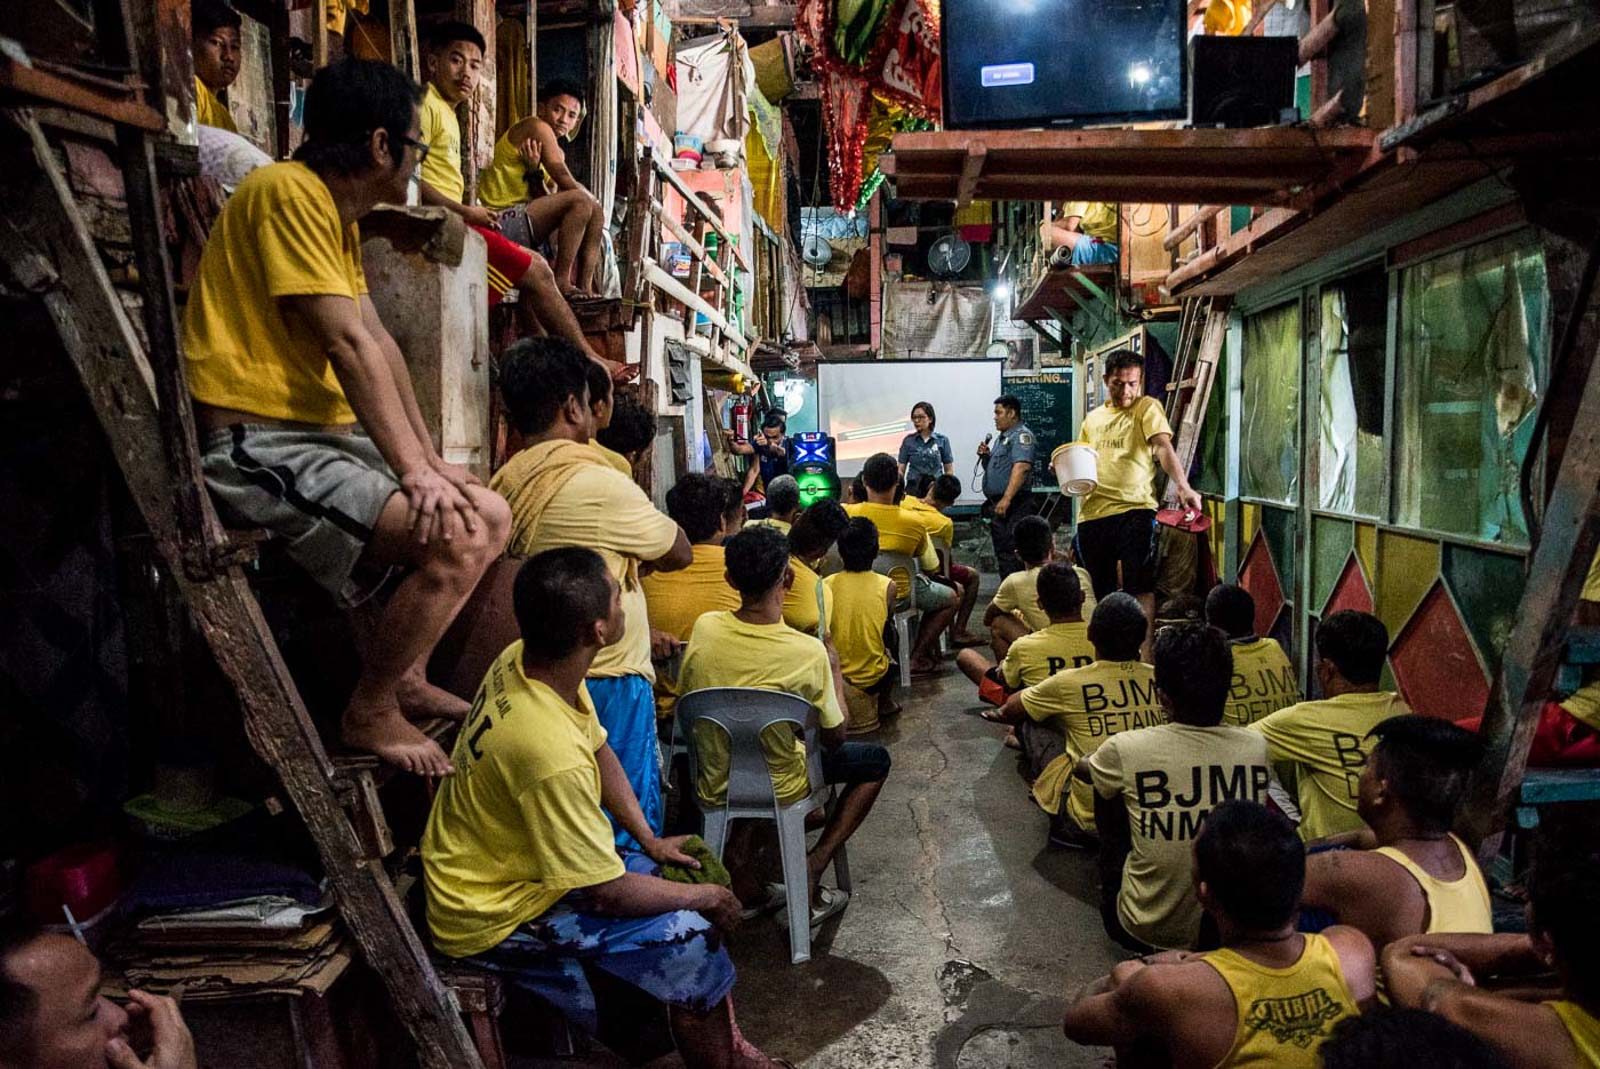 ‘Safer inside’: DILG rejects release of low-level offenders amid coronavirus